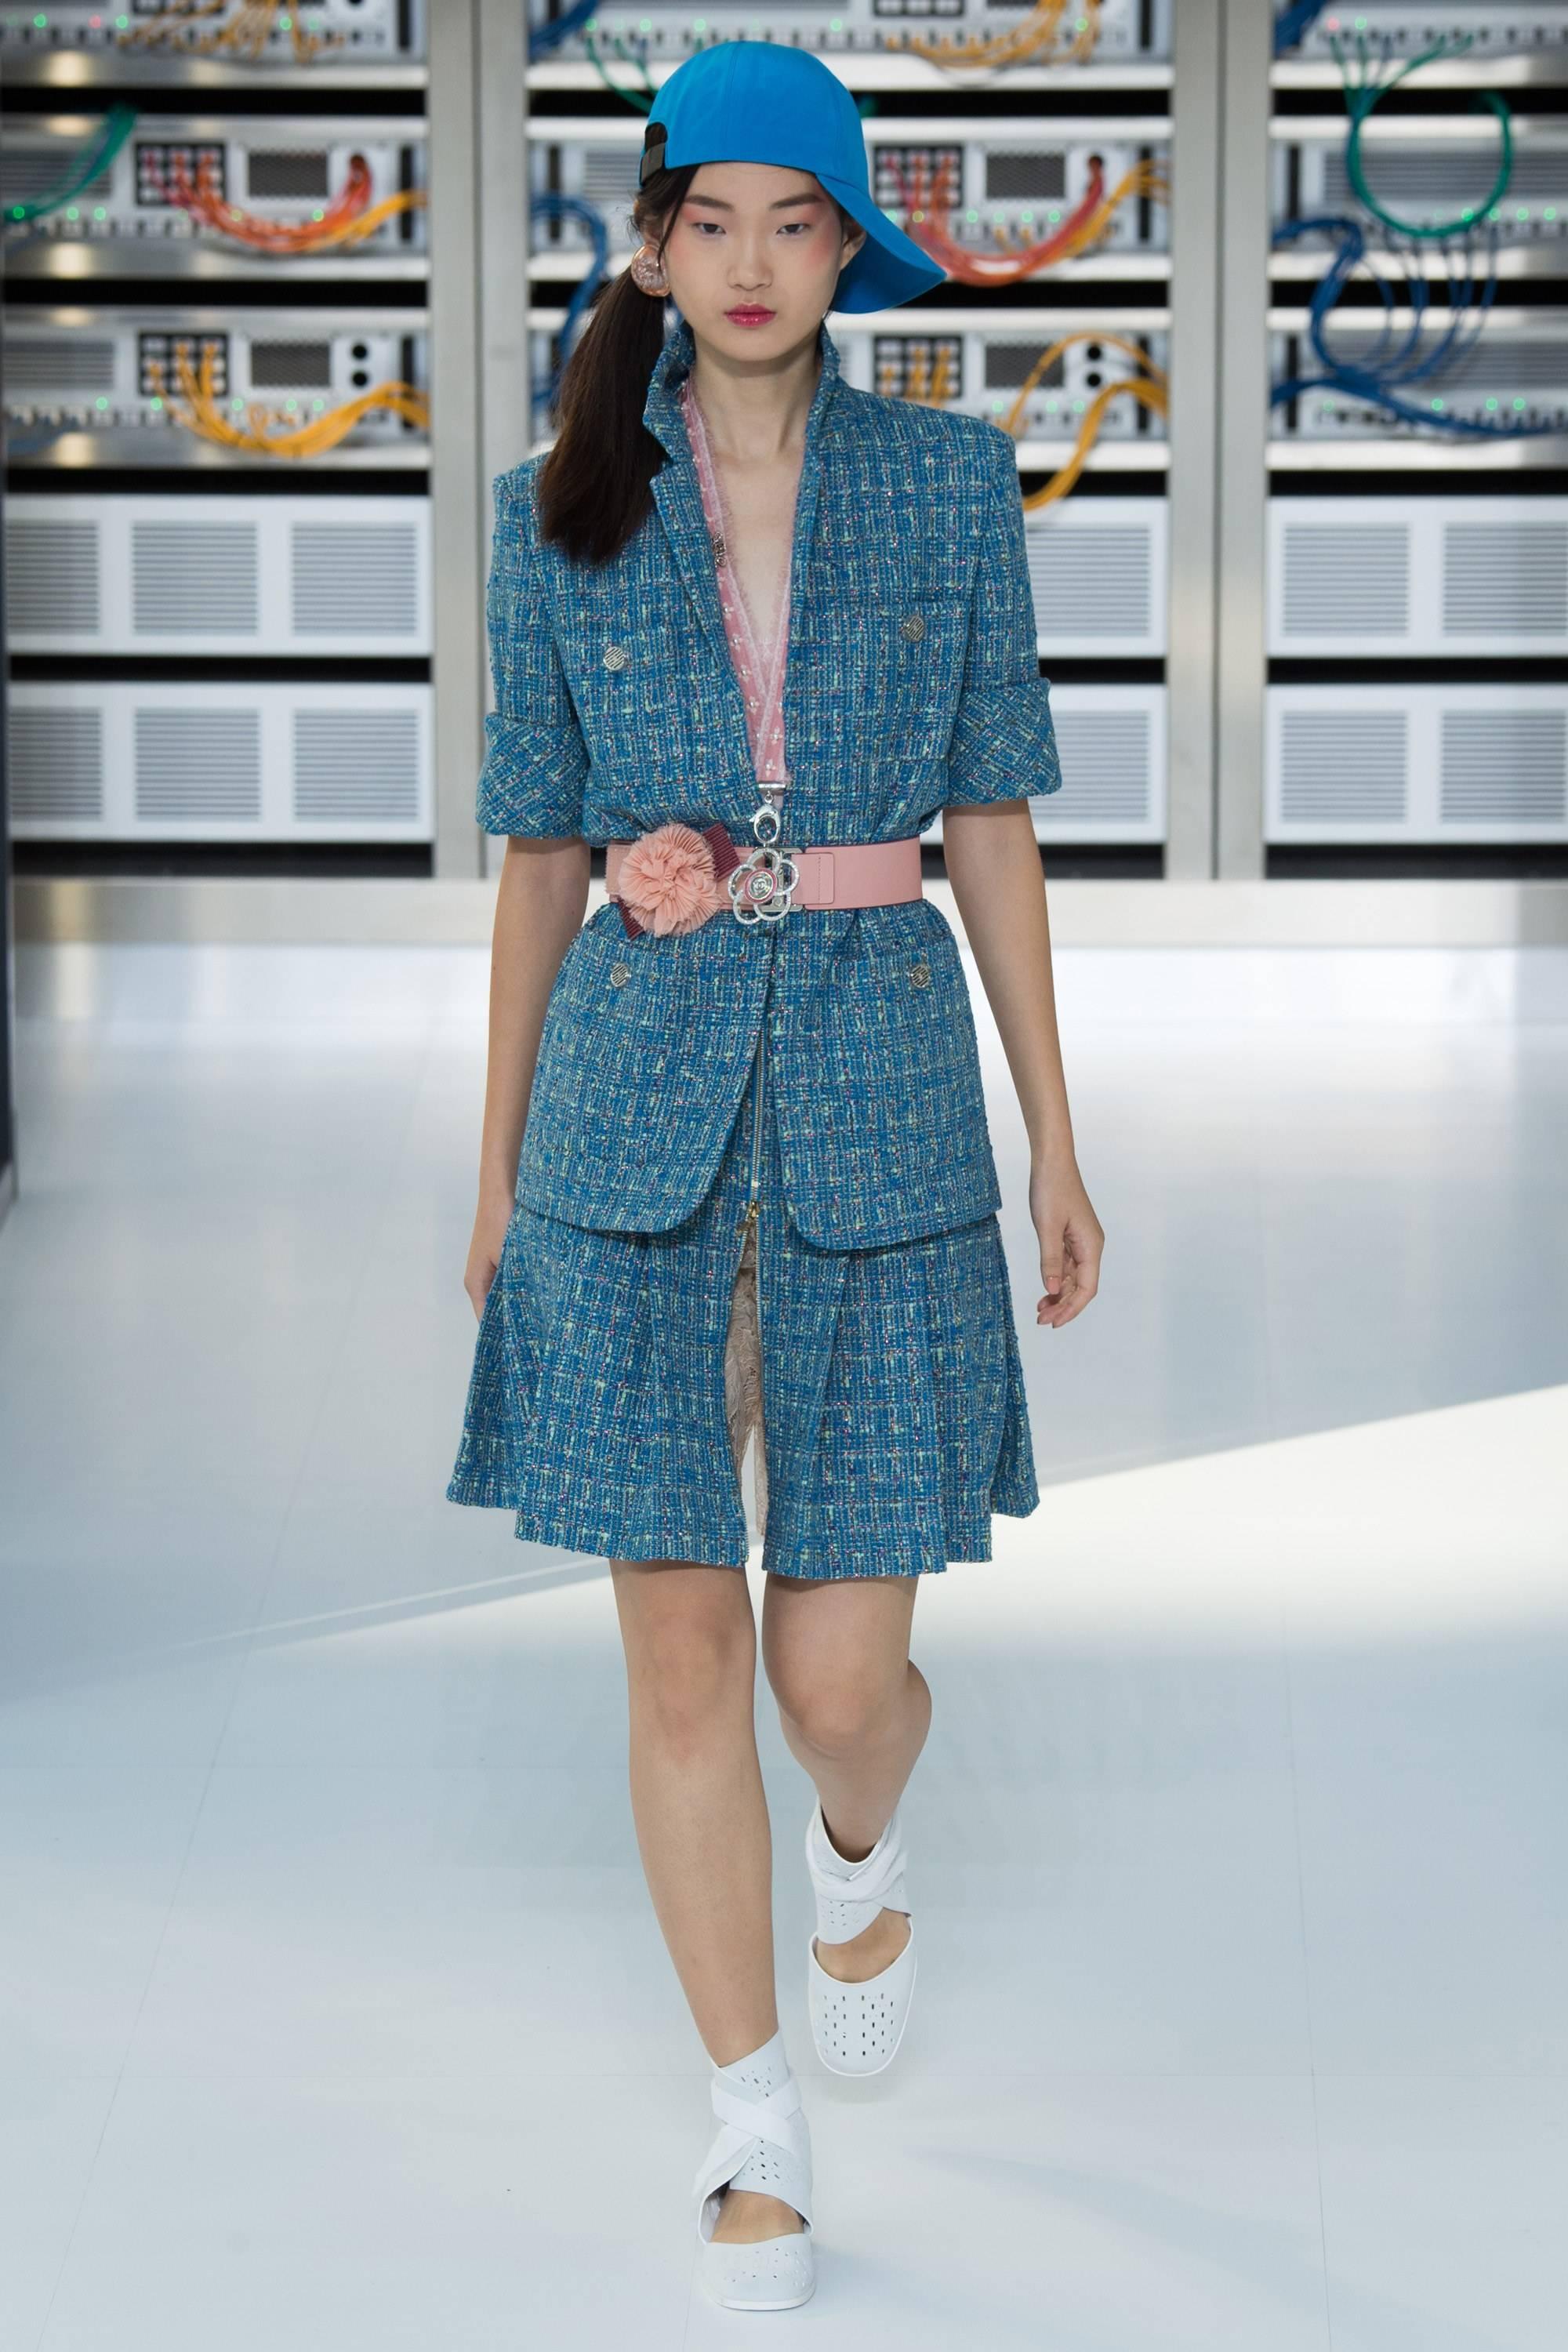 Chanel 17S -  2017 Spring runway Current Season Turquoise Blue Tweed Skirt Suit.  The tweed has green tones and fine metallic red threads. Jacket fastens at front with hidden hook and eye closures, has front chest and hip pockets, and silvertone